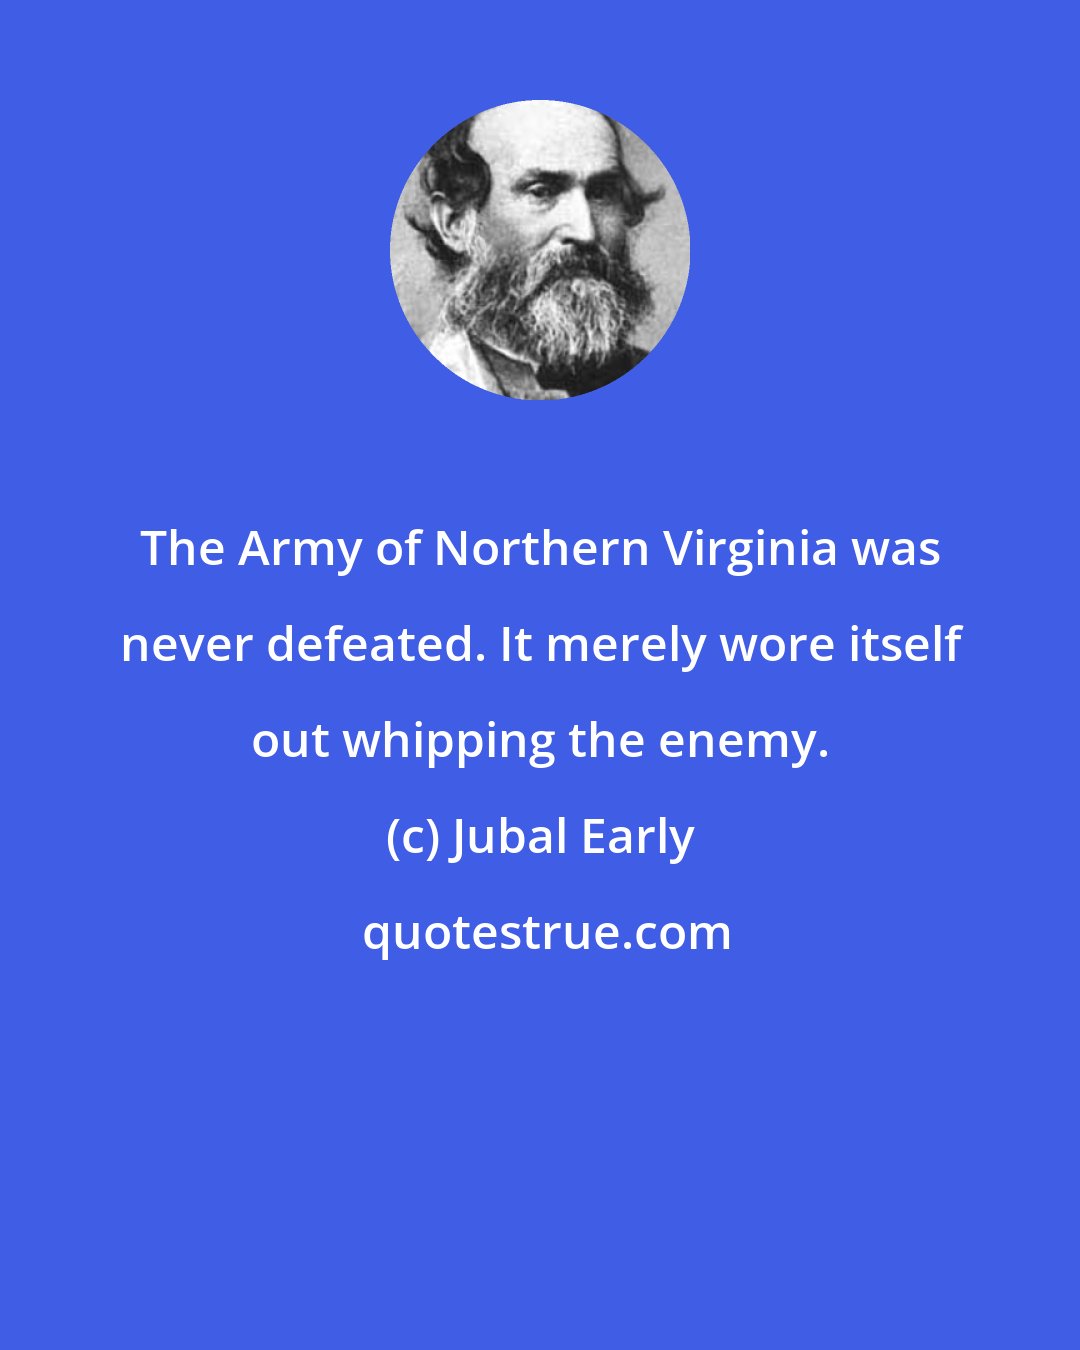 Jubal Early: The Army of Northern Virginia was never defeated. It merely wore itself out whipping the enemy.